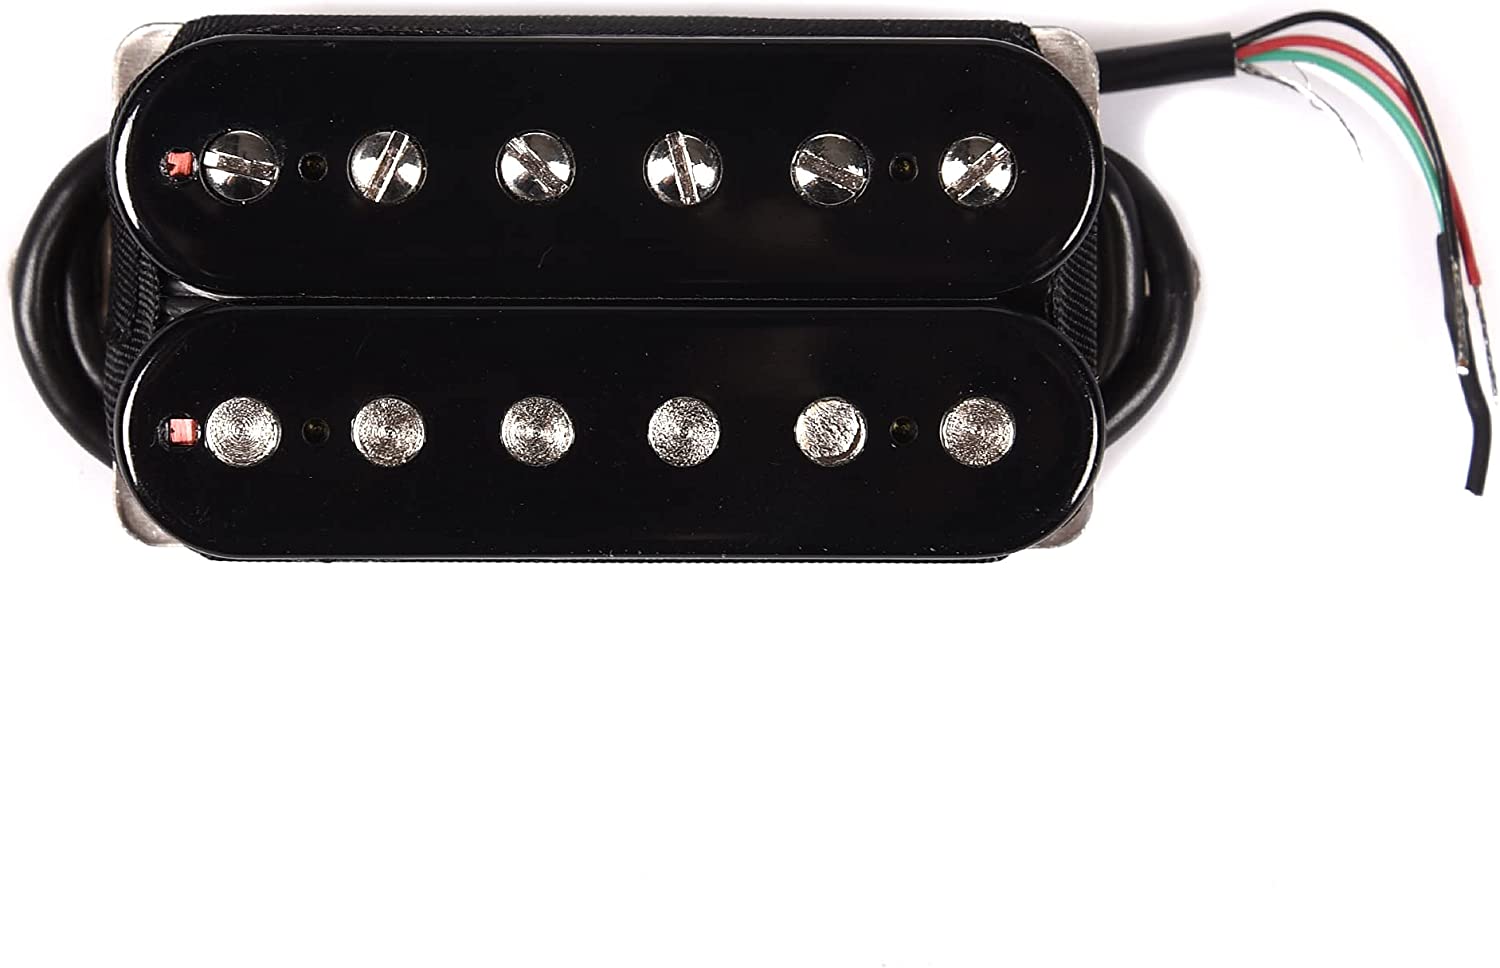 Bare Knuckle Bootcamp Humbucker Brute Force Bridge 6-String 50mm Pickup on a white background